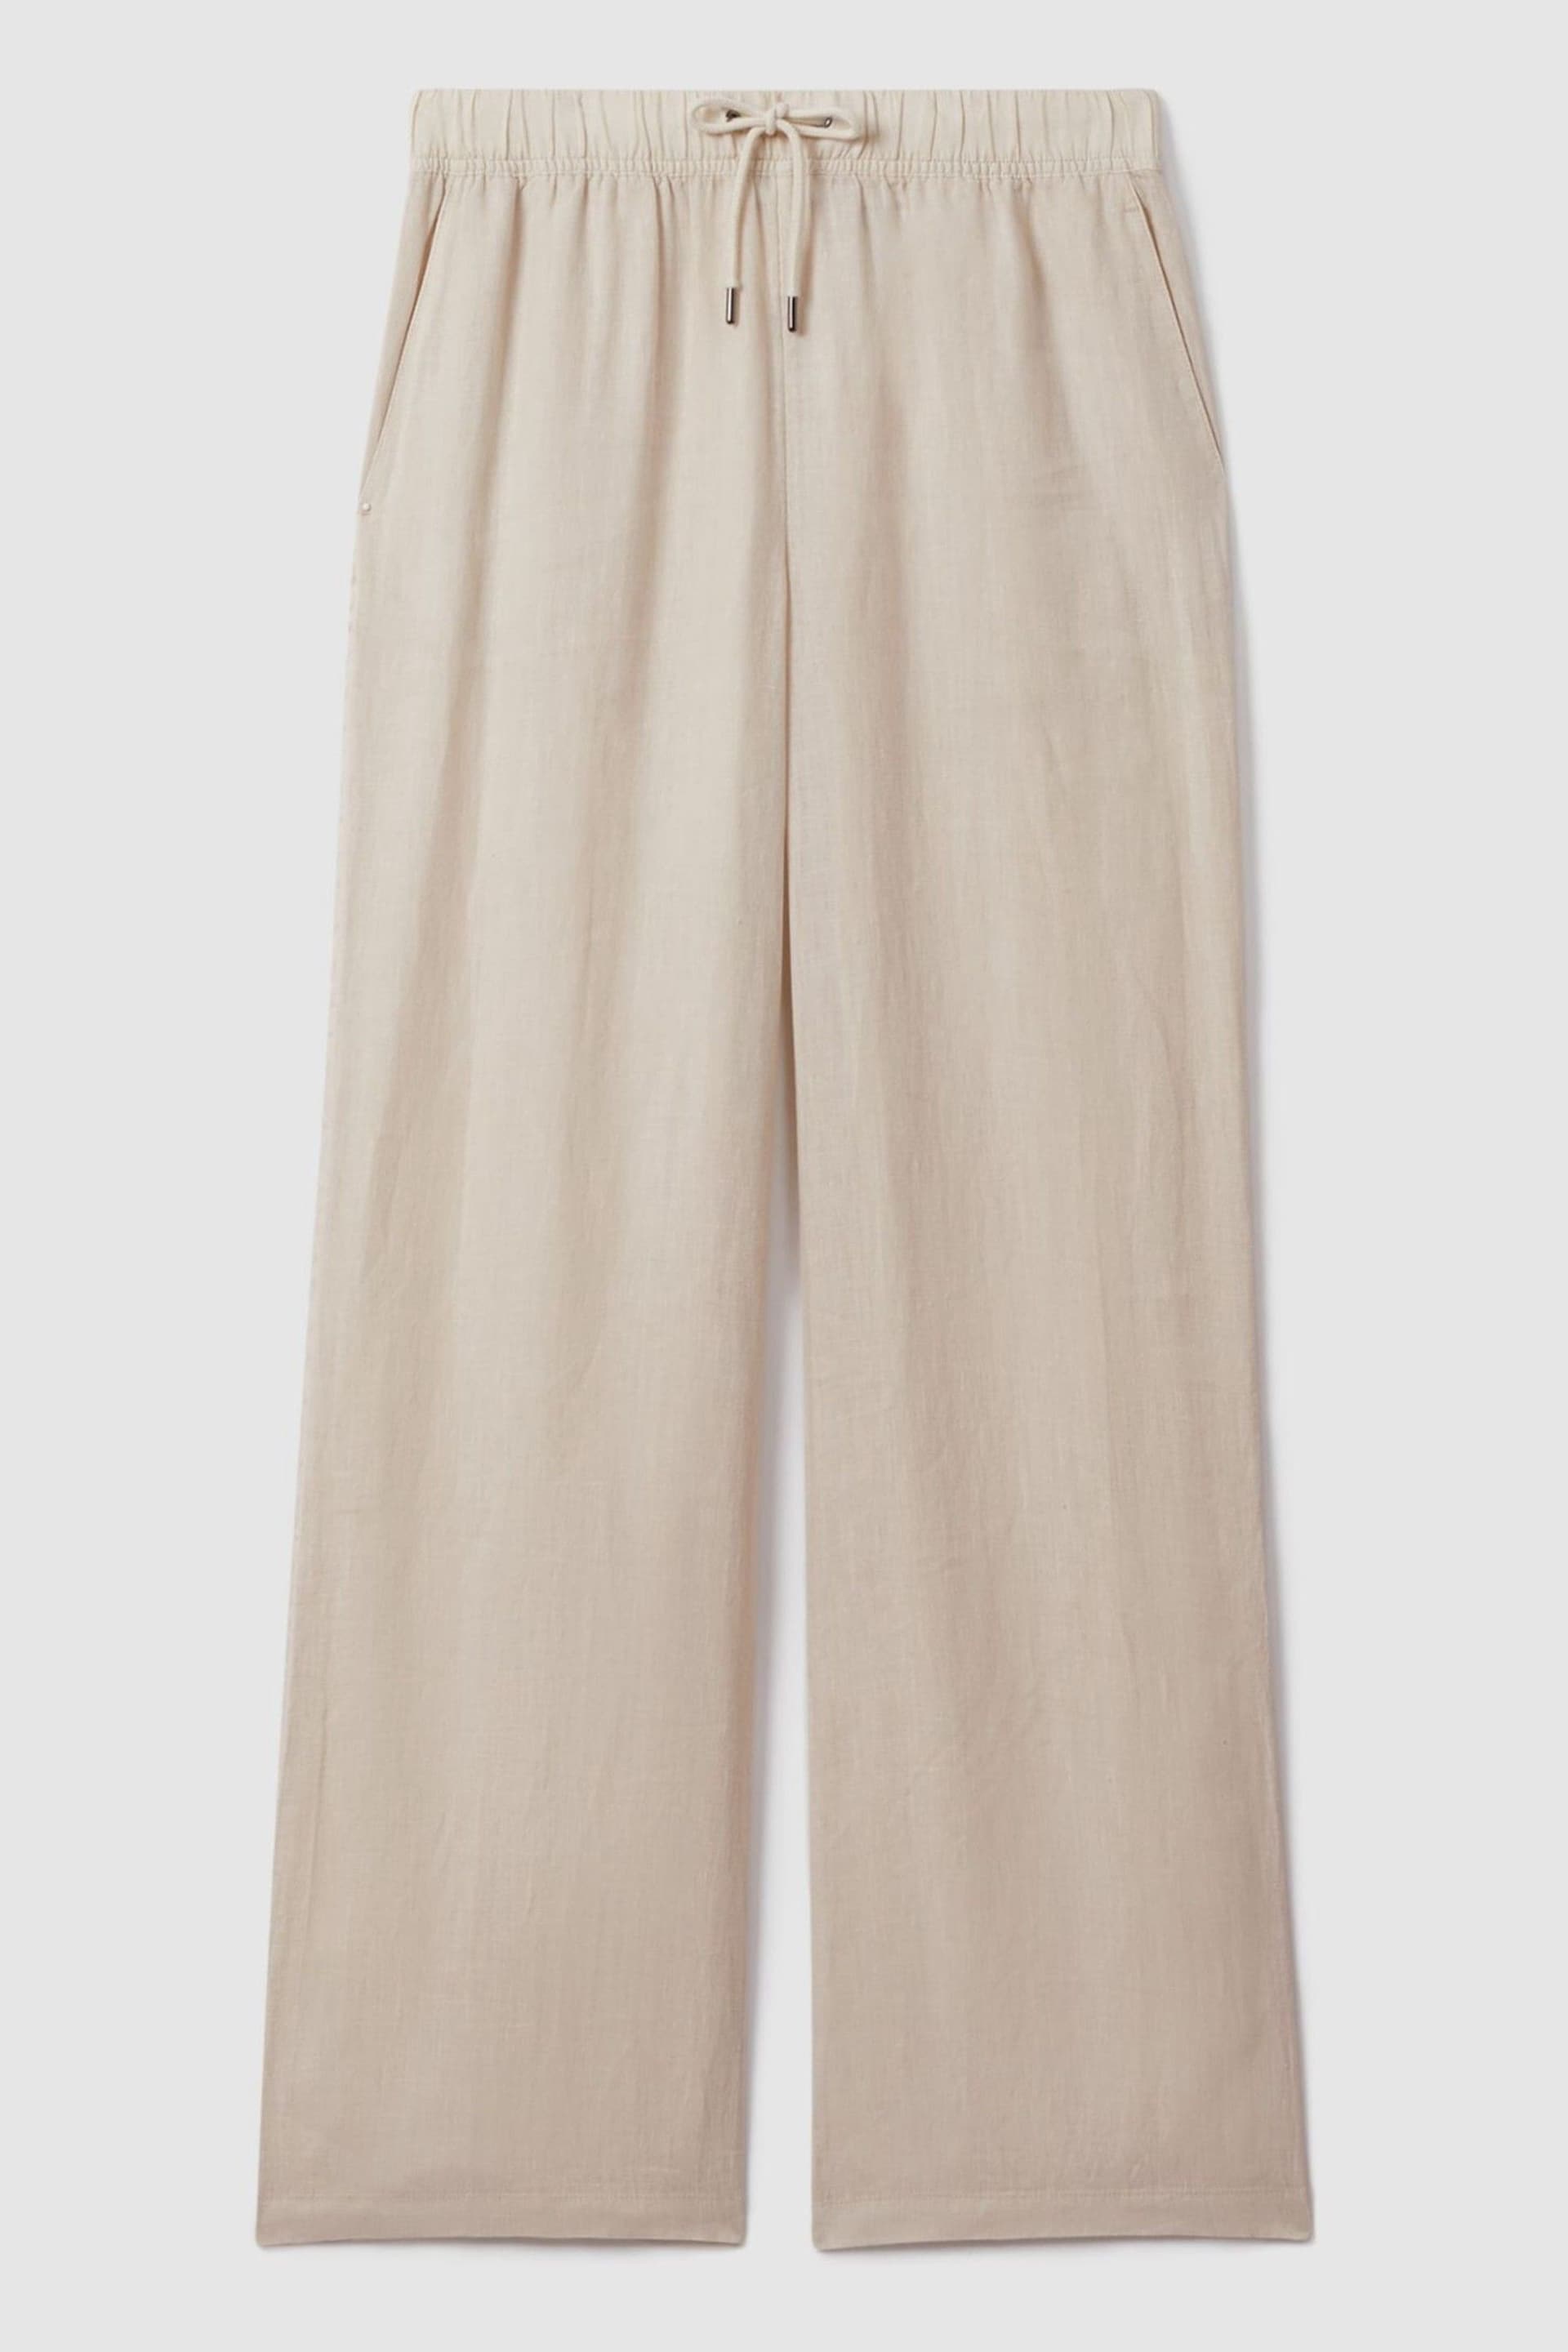 Reiss Oatmeal Cleo Garment Dyed Wide Leg Linen Trousers - Image 2 of 6